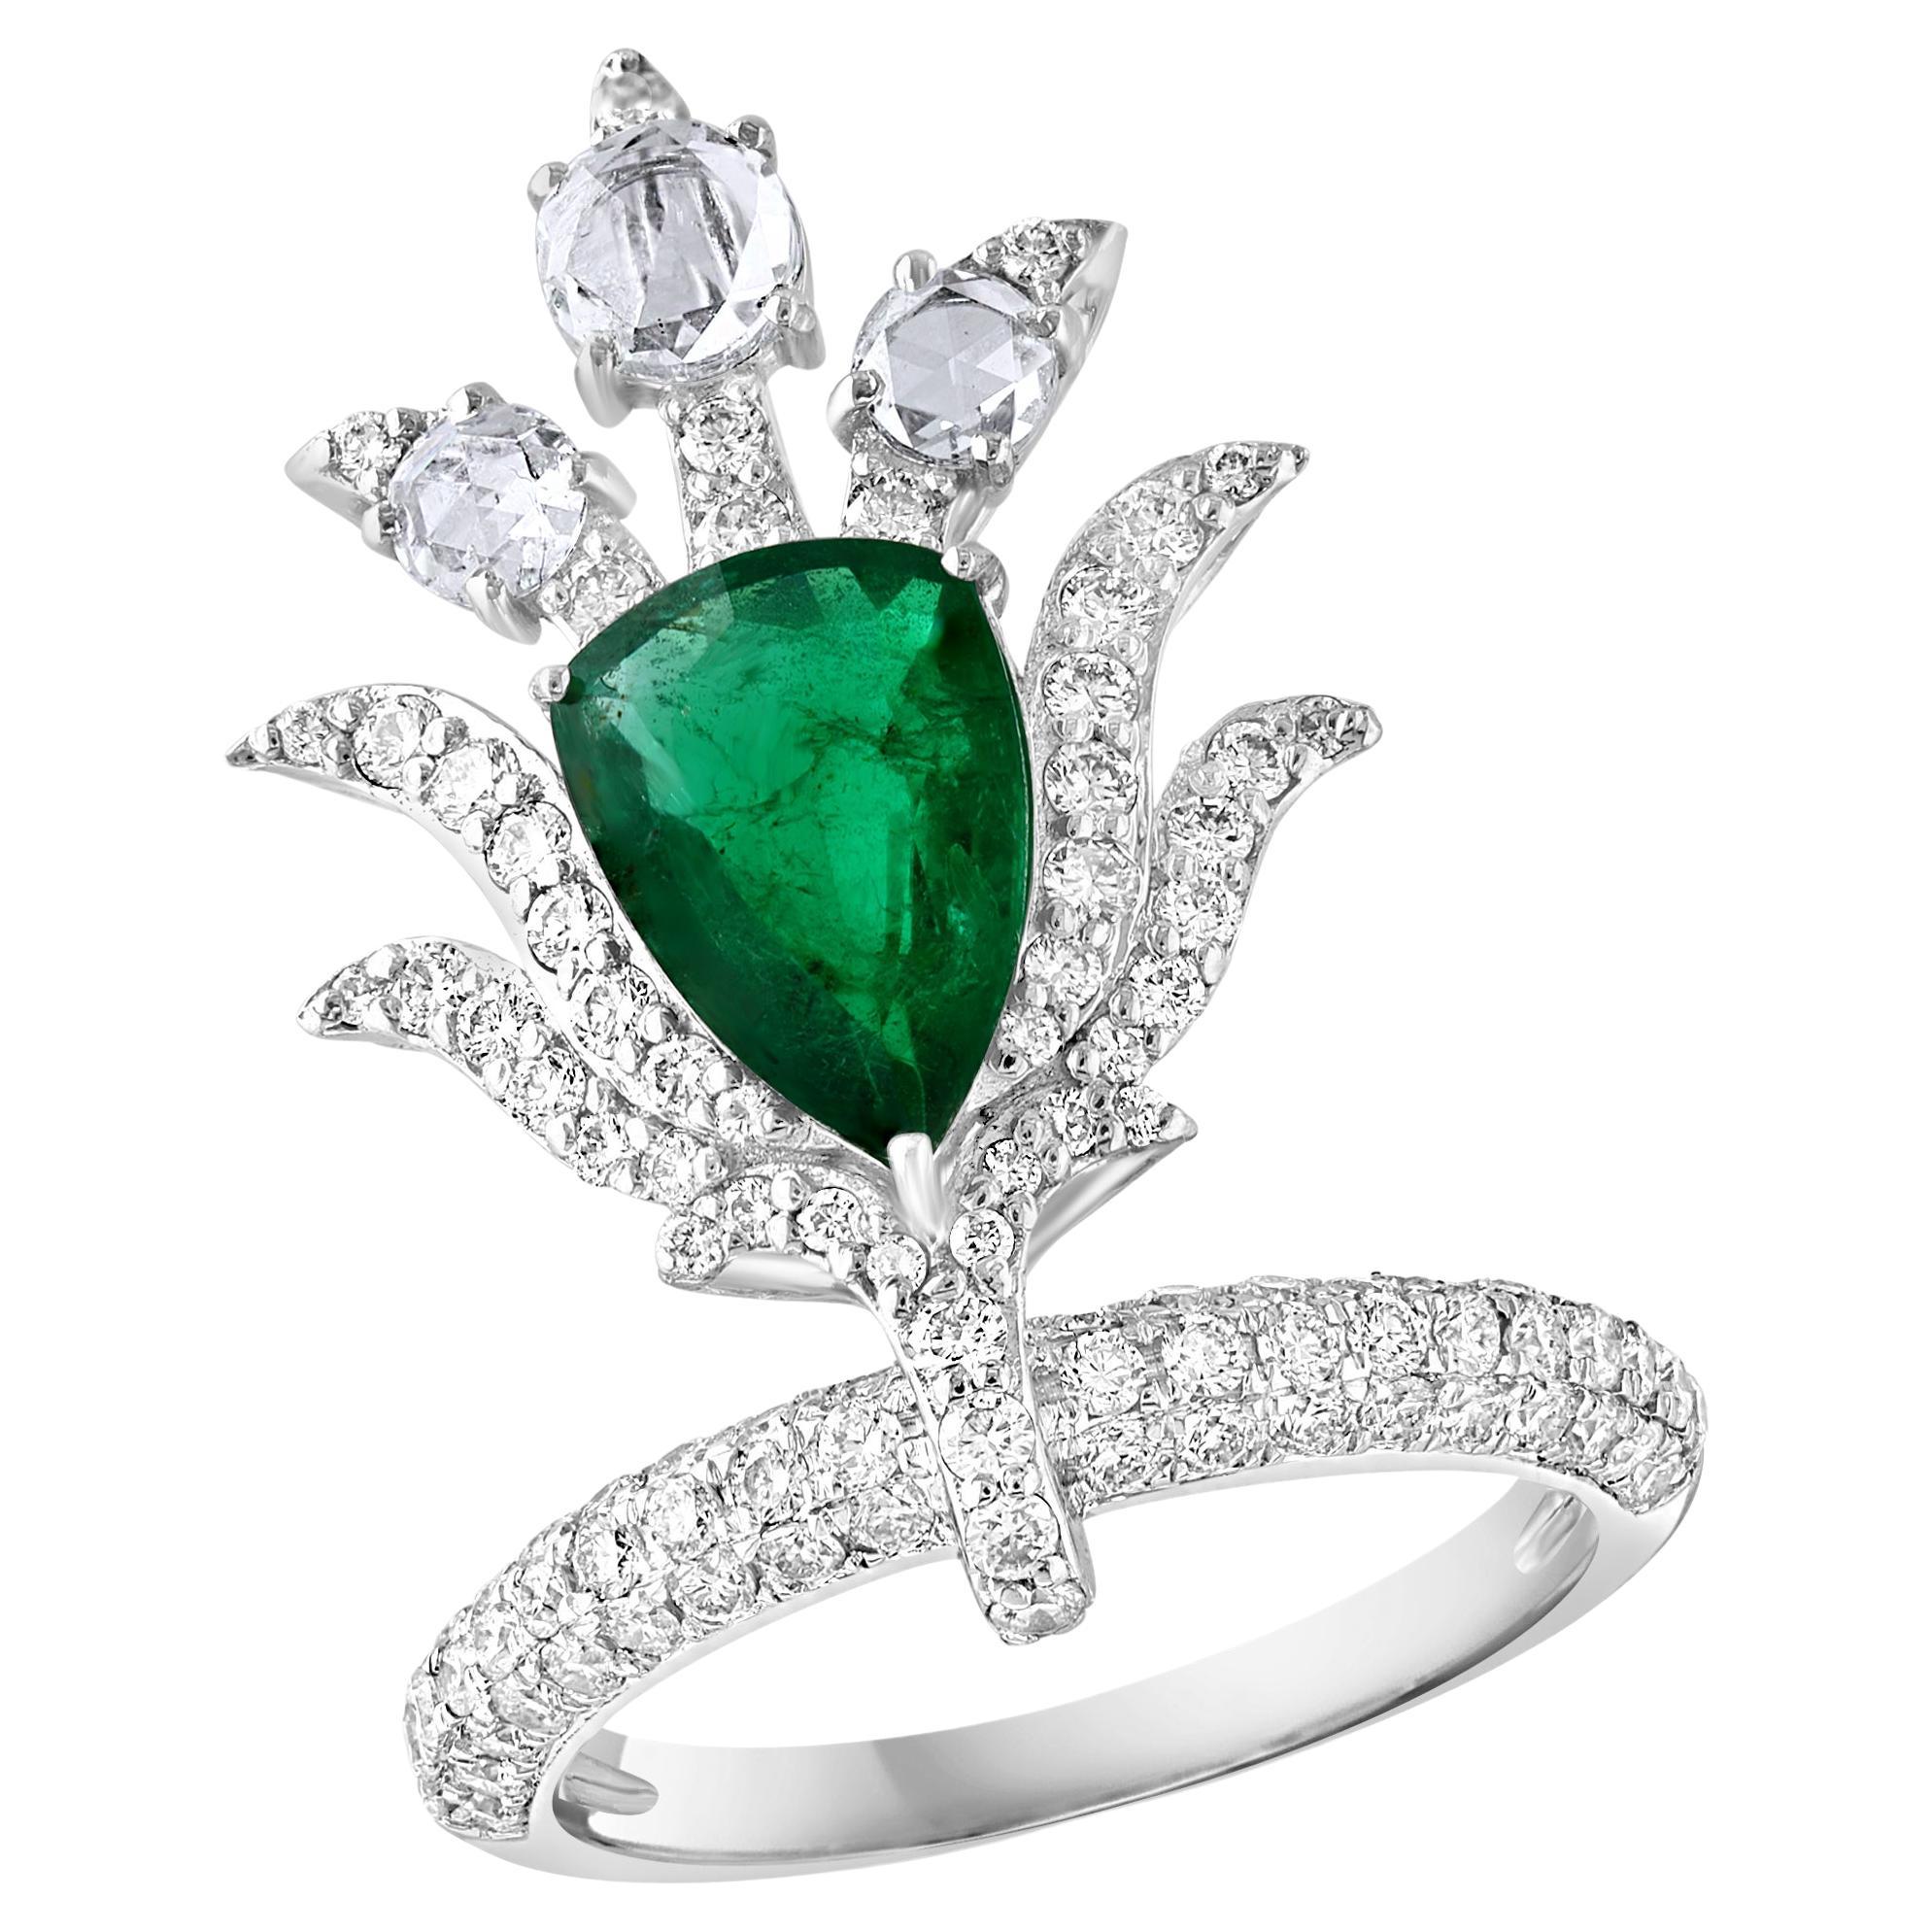 2 Ct Finest Zambian Pear Emerald & 2 Ct Diamond Ring in 18 Kt Gold Size 7 For Sale